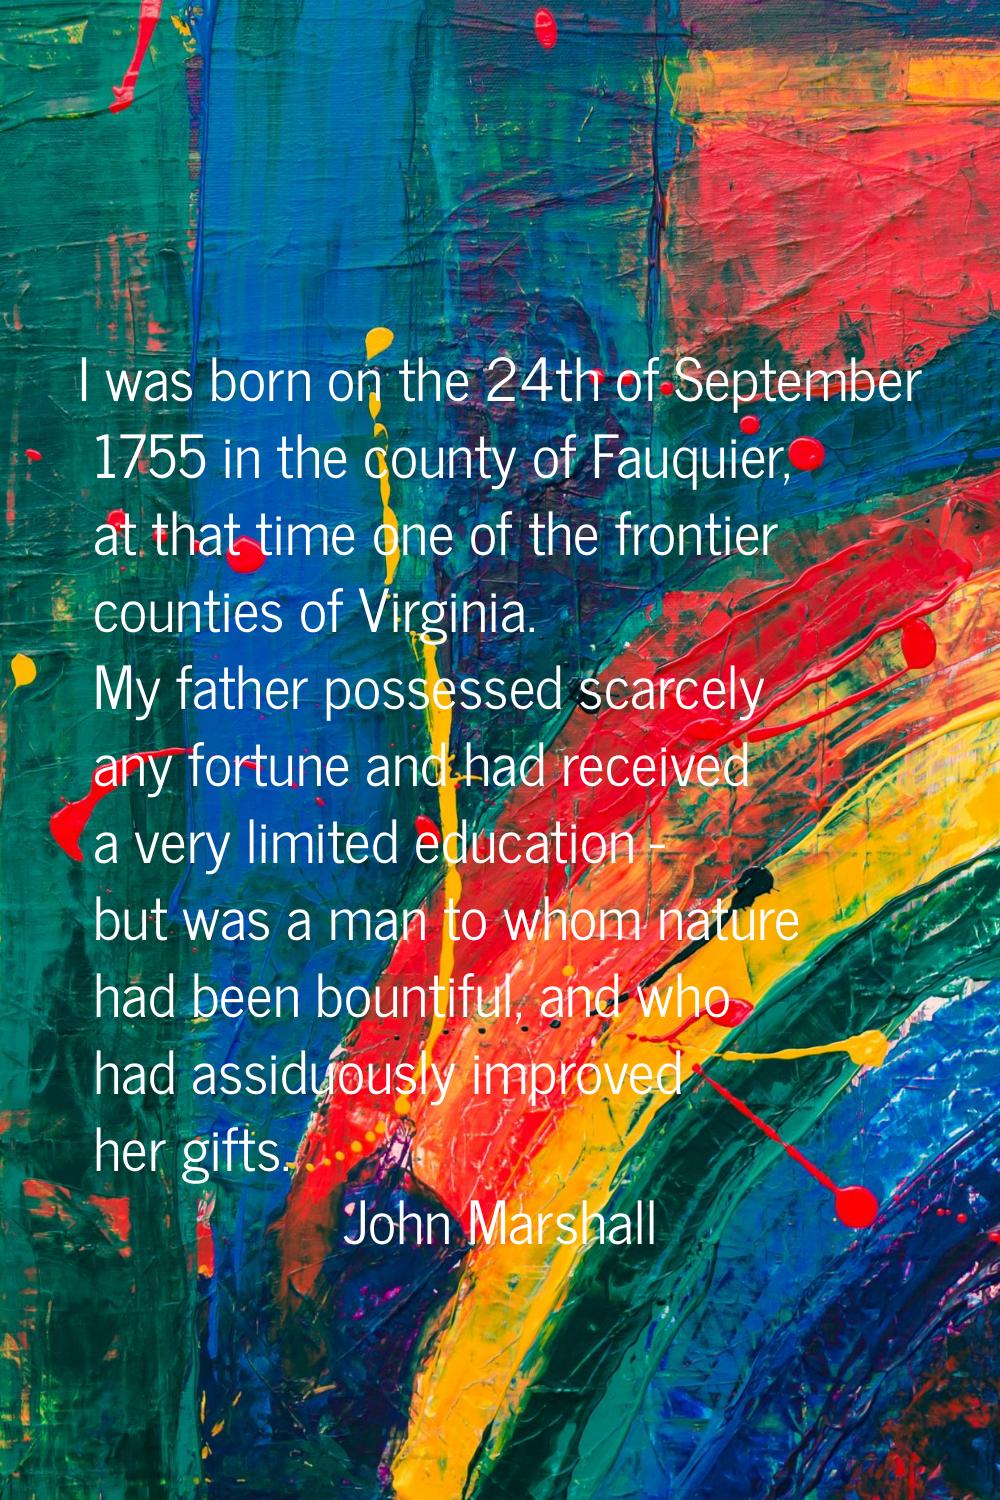 I was born on the 24th of September 1755 in the county of Fauquier, at that time one of the frontie